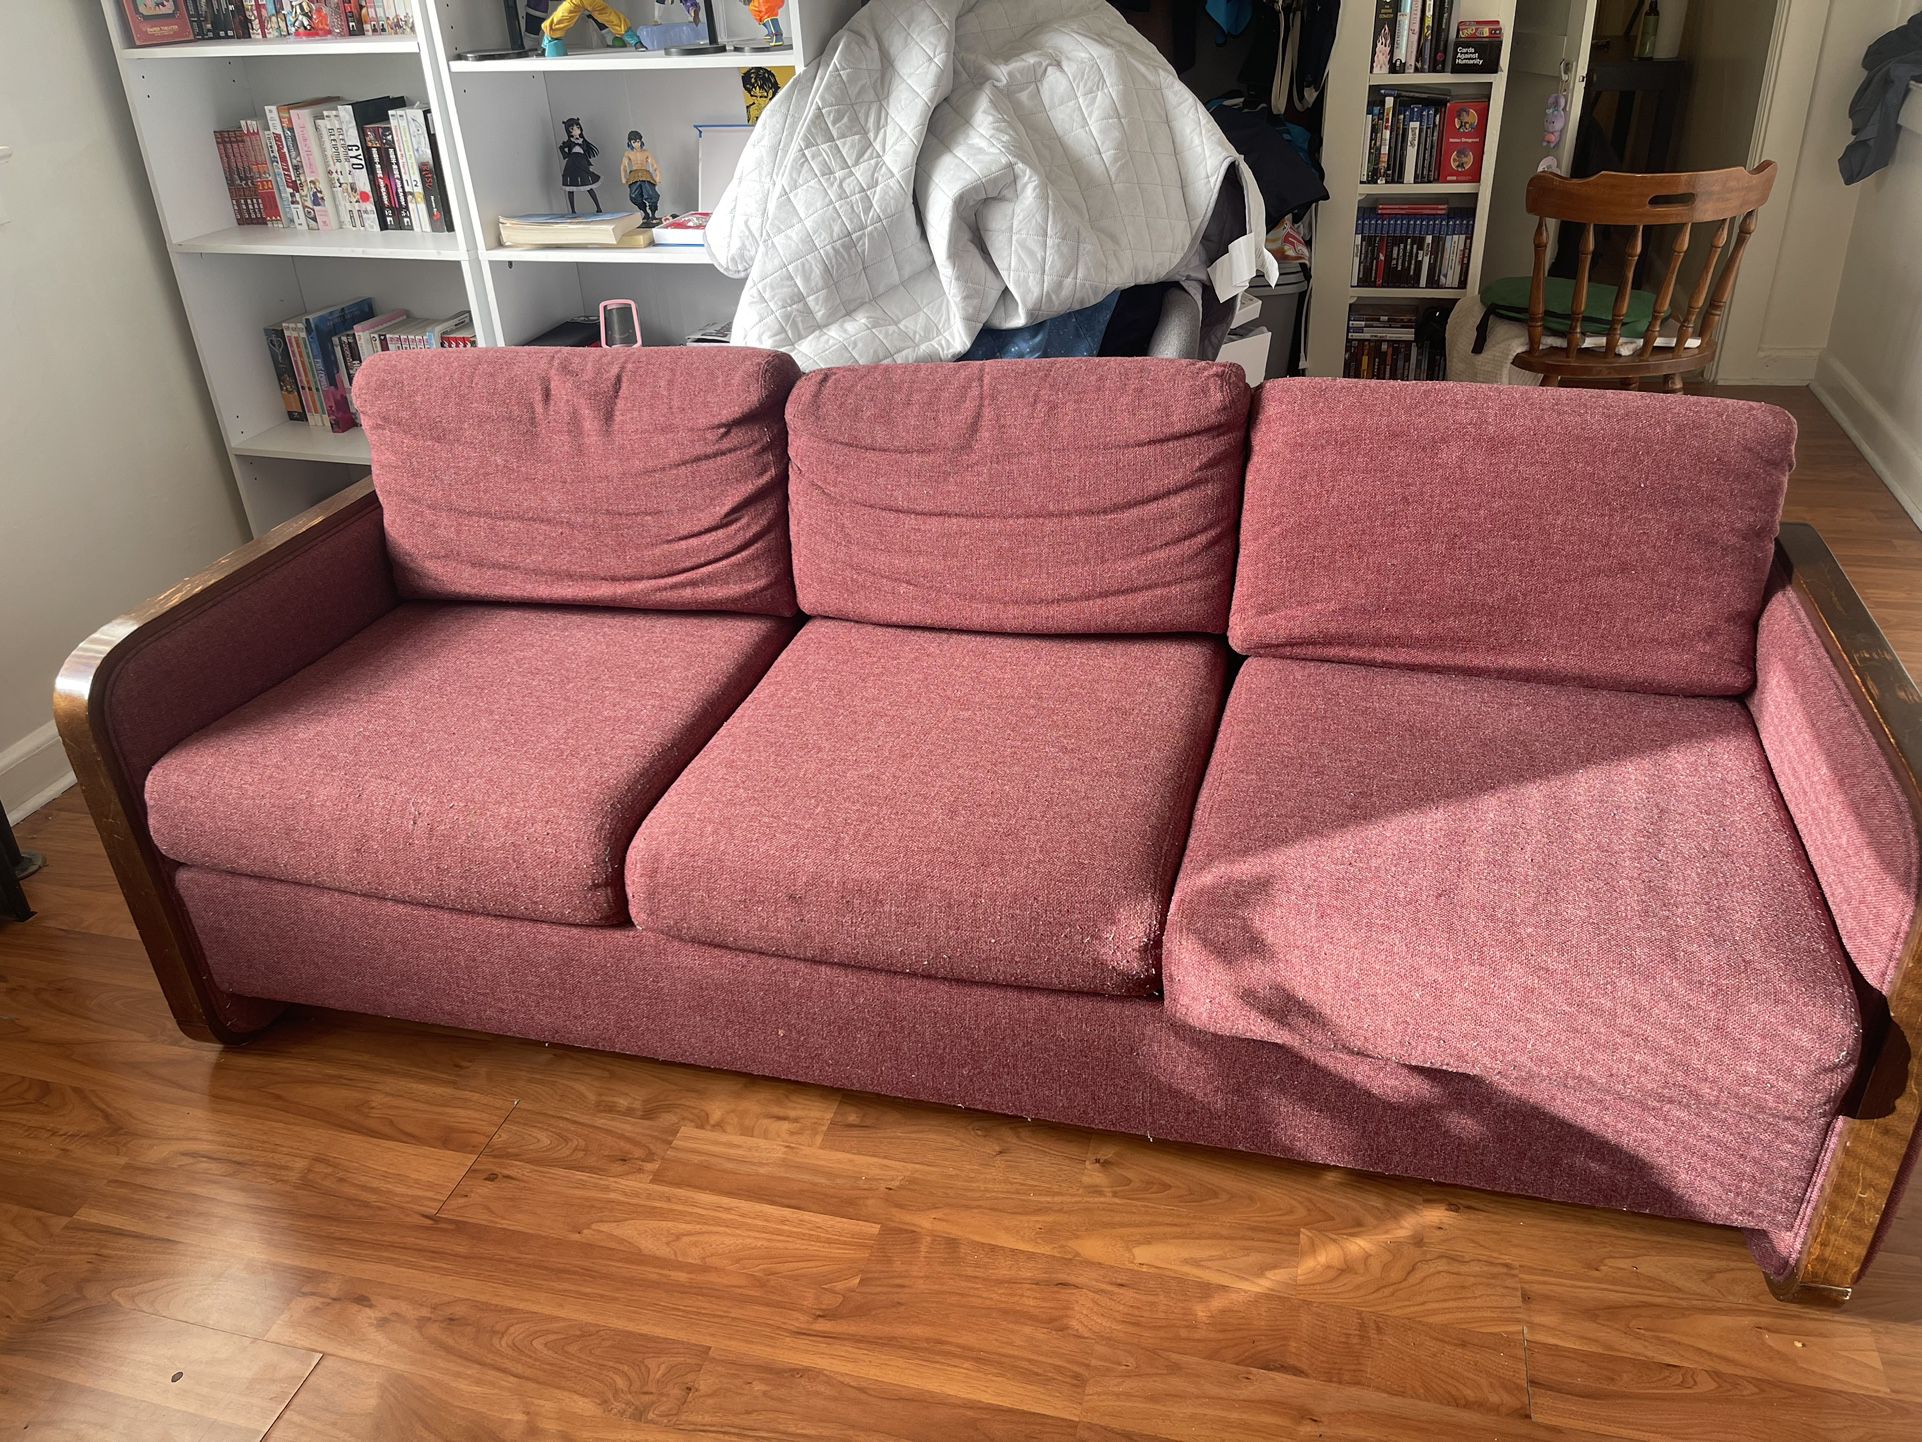 Free Burgundy Couch